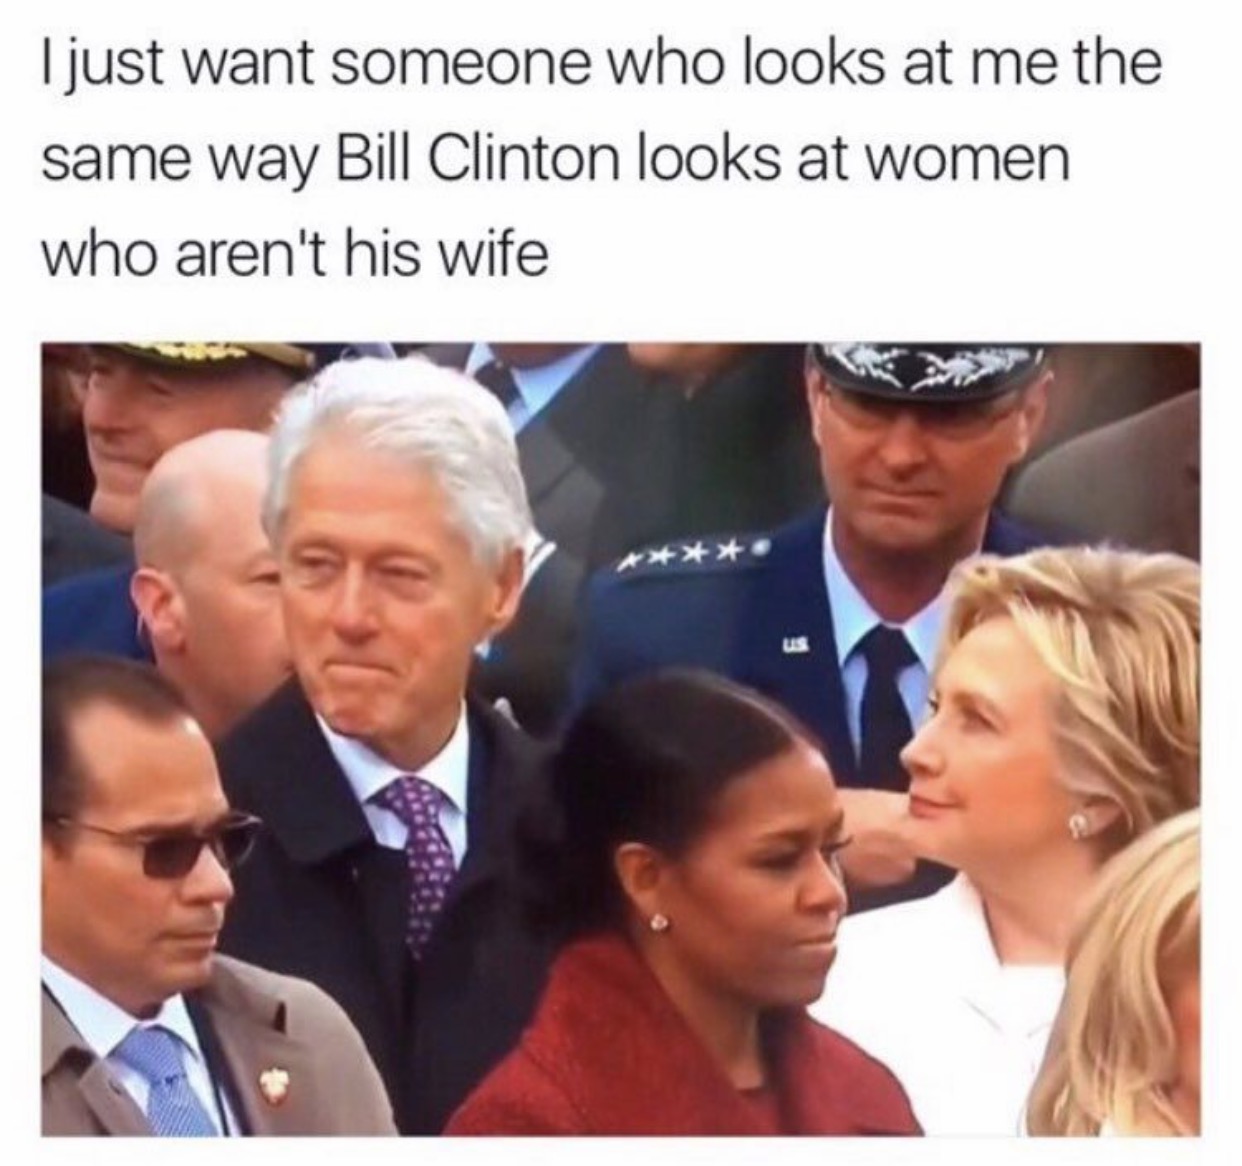 bill clinton checking out ivanka - Tjust want someone who looks at me the same way Bill Clinton looks at women who aren't his wife